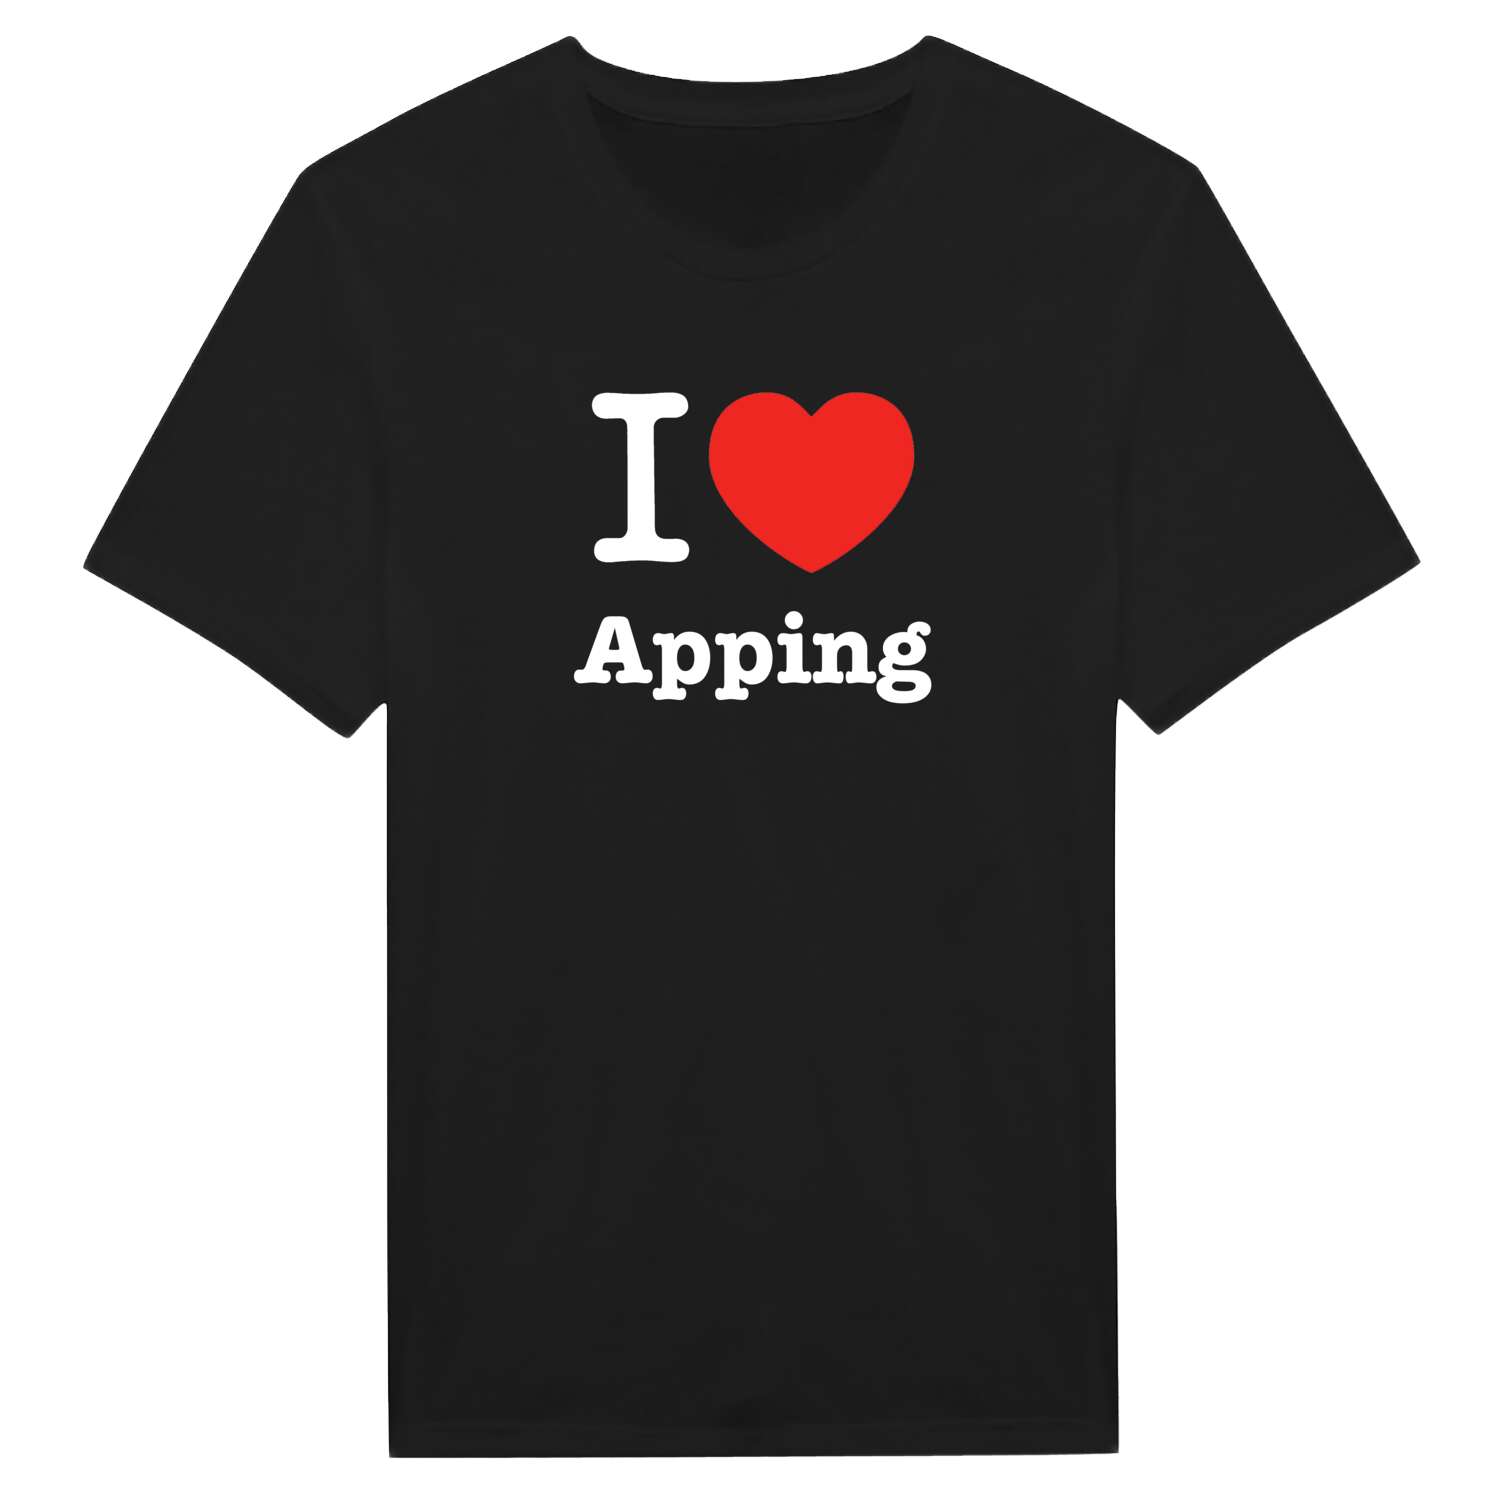 Apping T-Shirt »I love«